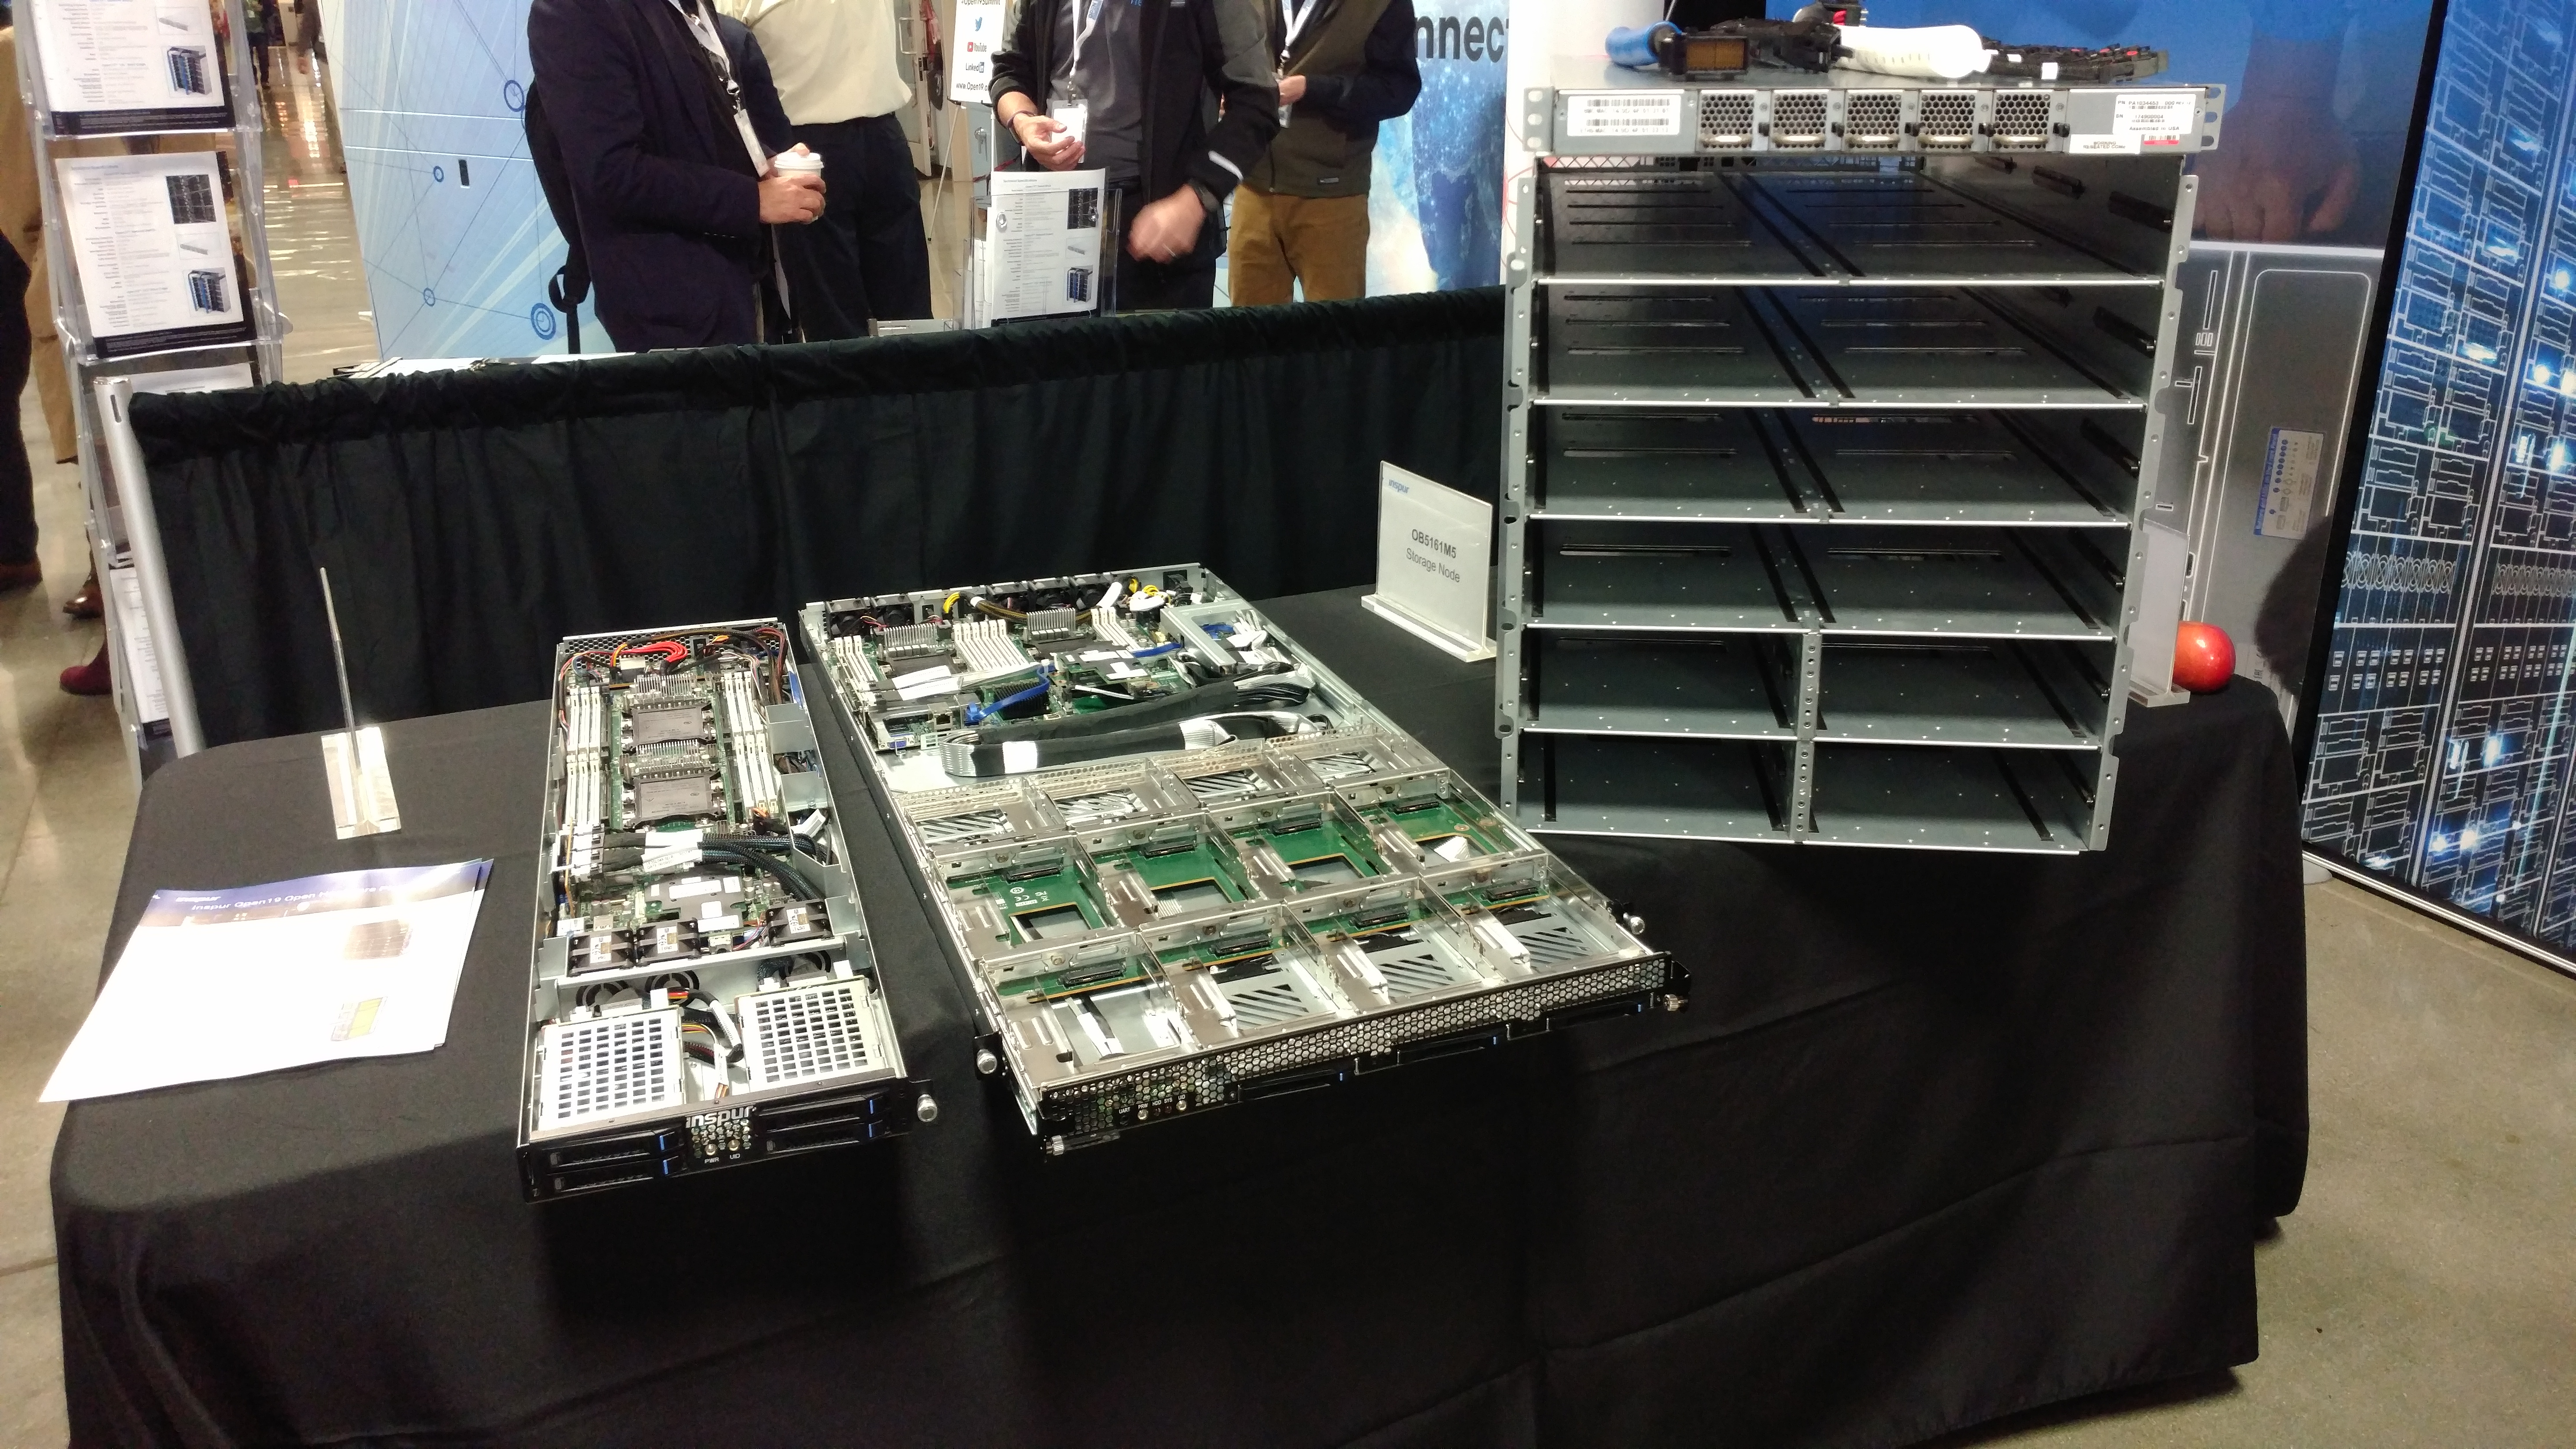 Open19 server "bricks" and a brick cage on display at the Open19 Foundation Summit 2019